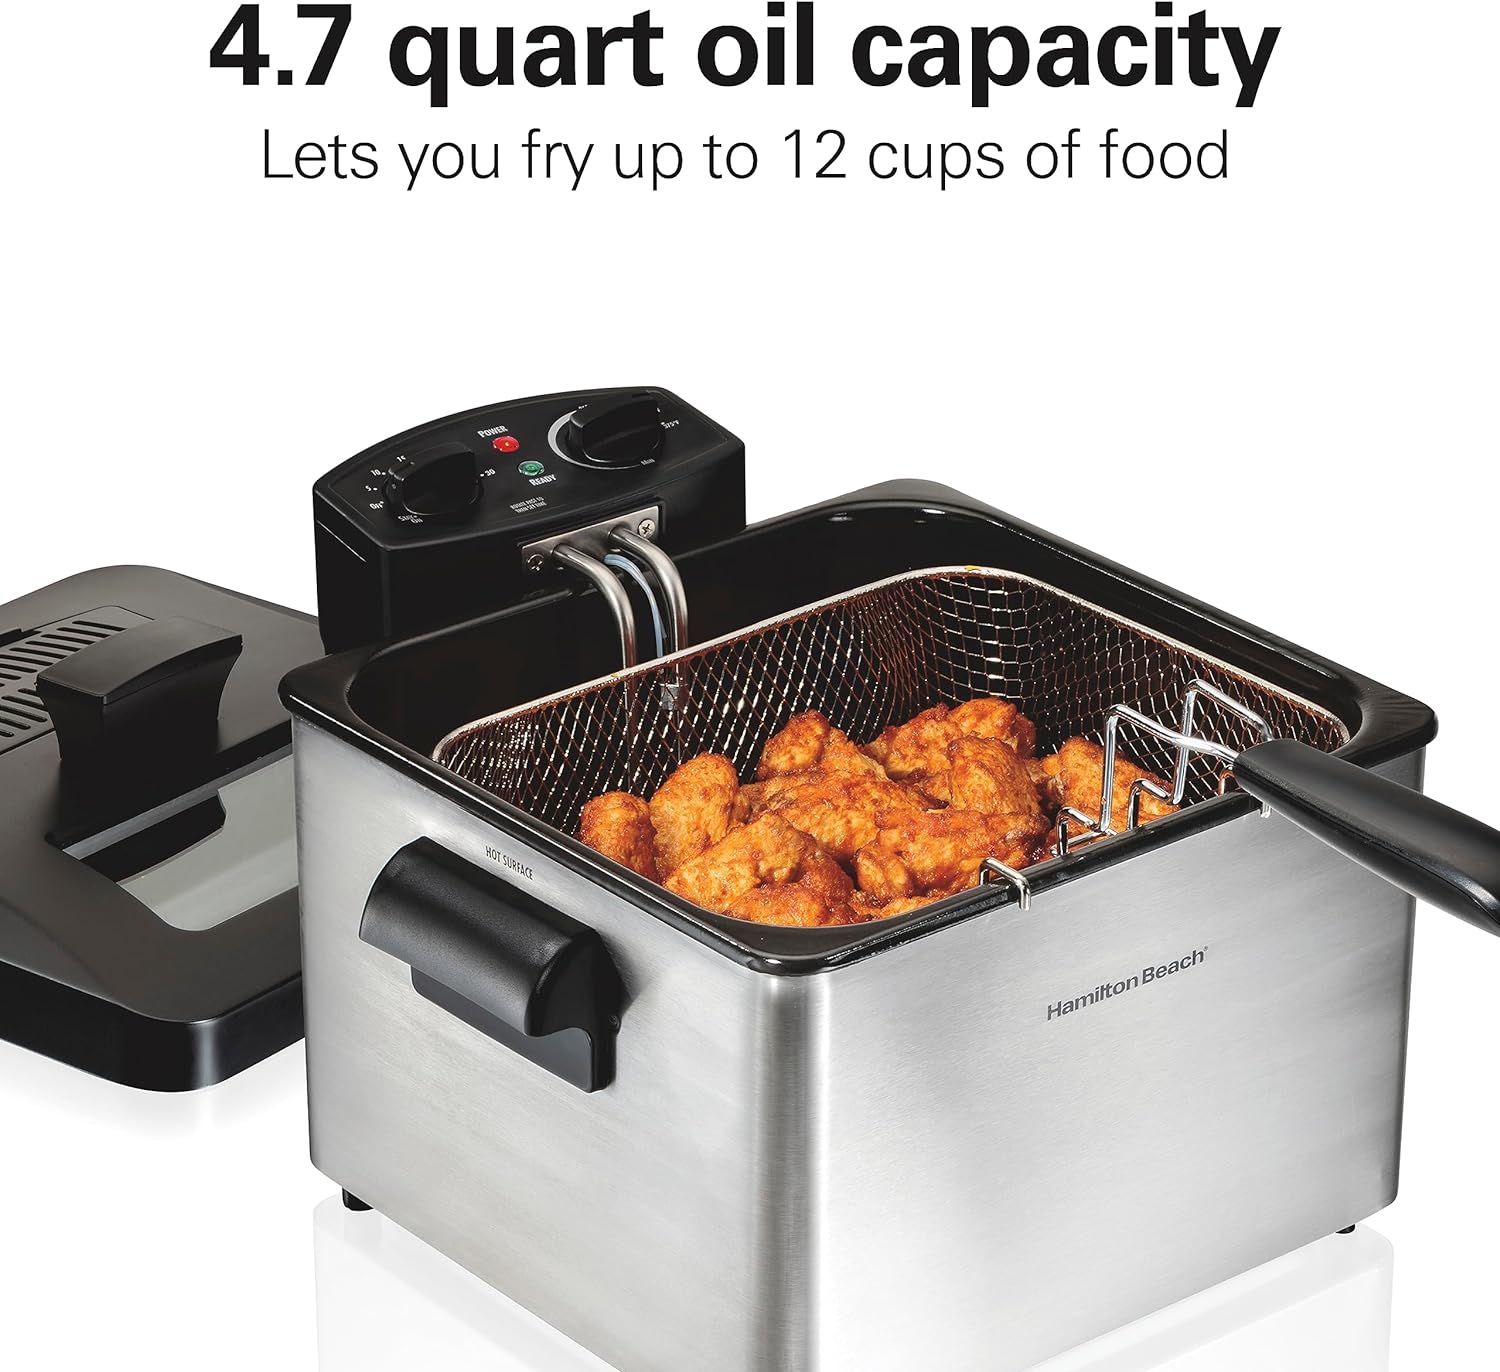 Hamilton Beach Slow Cooker  Triple Basket Electric Deep Fryer, 4.7 Quarts / 19 Cups Oil Capacity, Lid with View Window, Professional Style, 1800 Watts, Stainless Steel (35034)